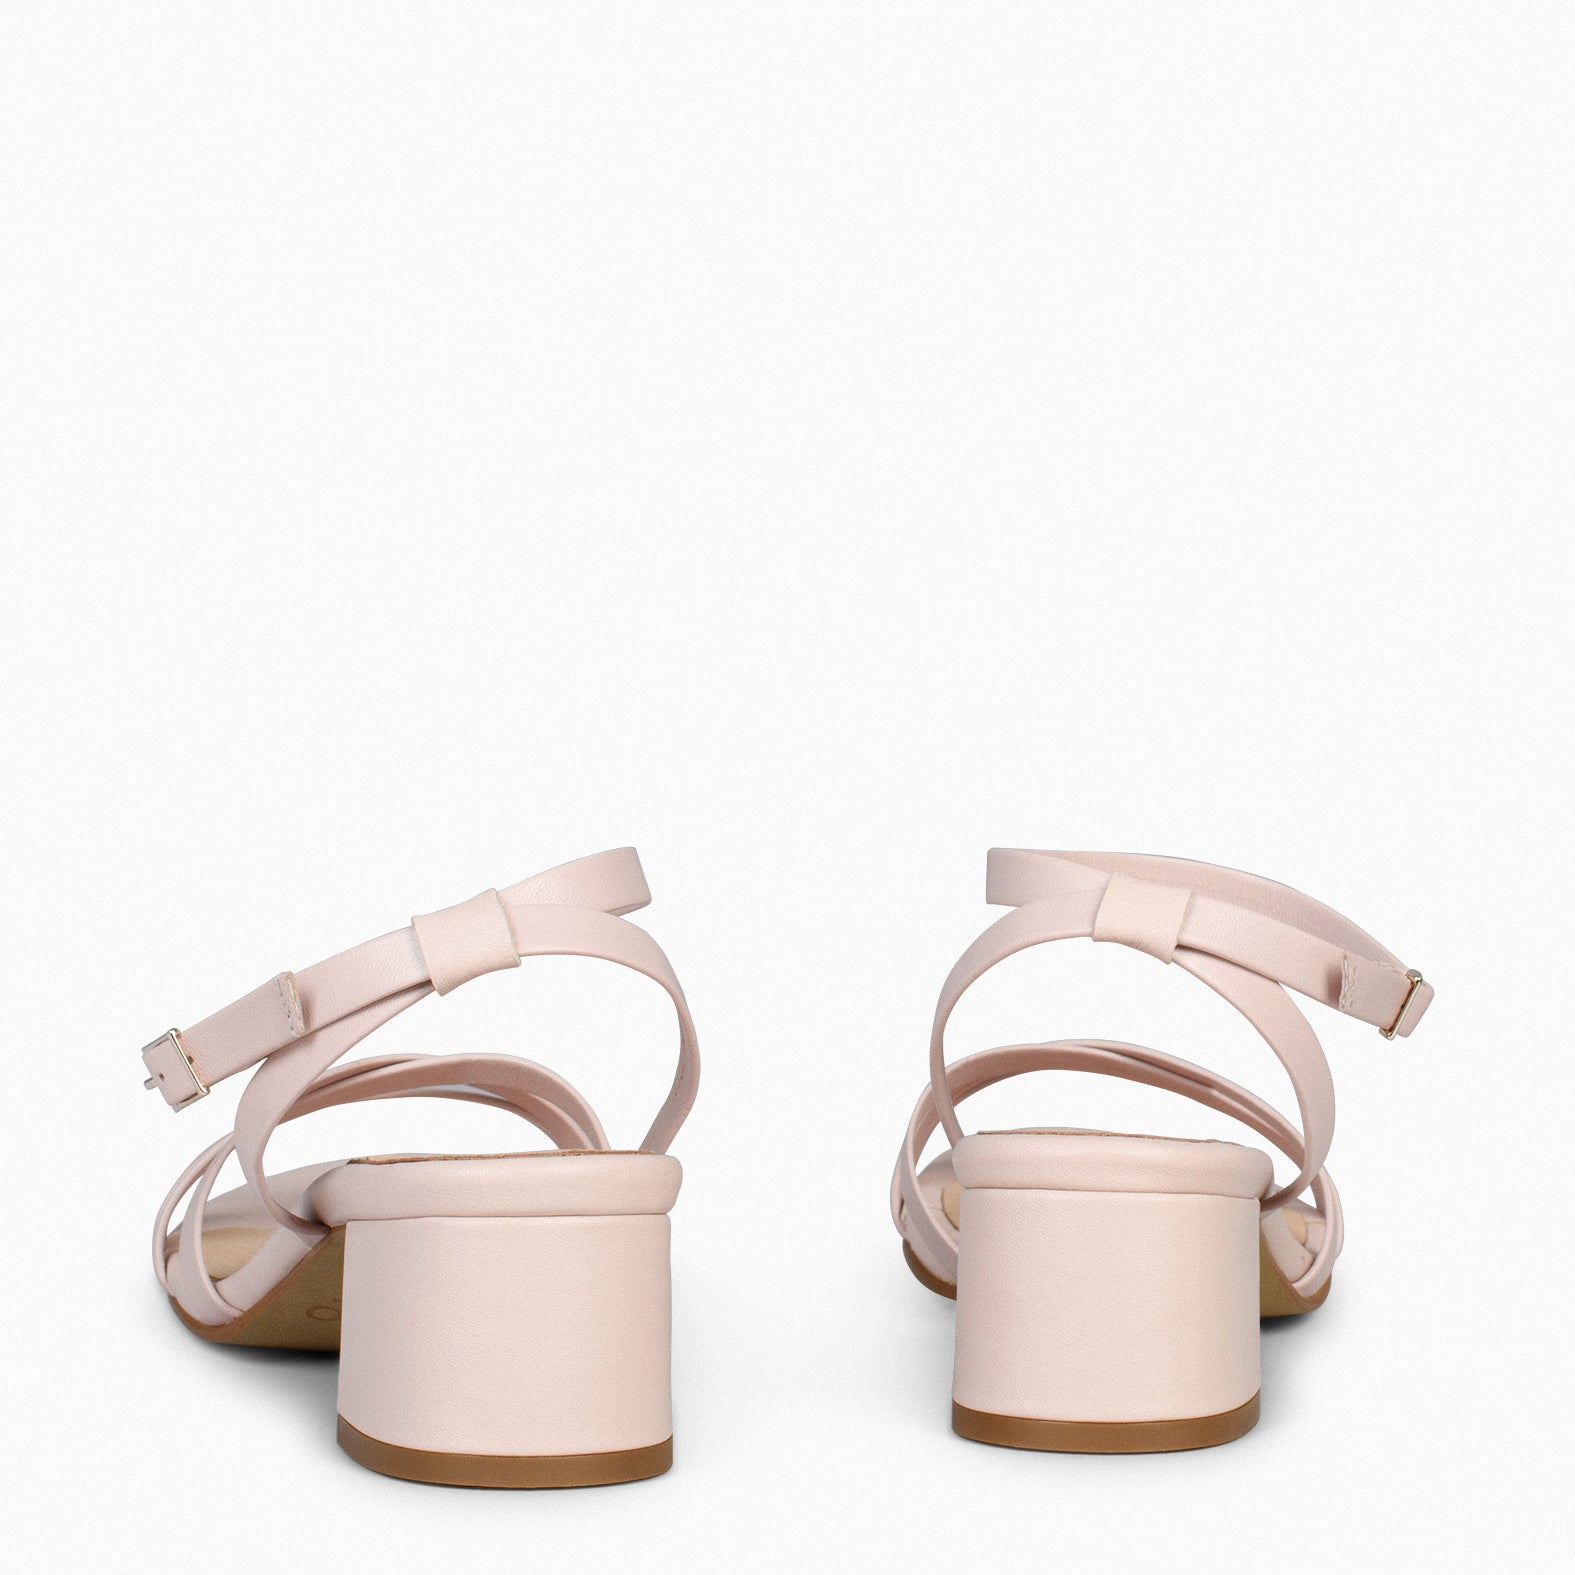 VIENA – NUDE SANDAL WITH THIN STRAPS AND LOW HEEL